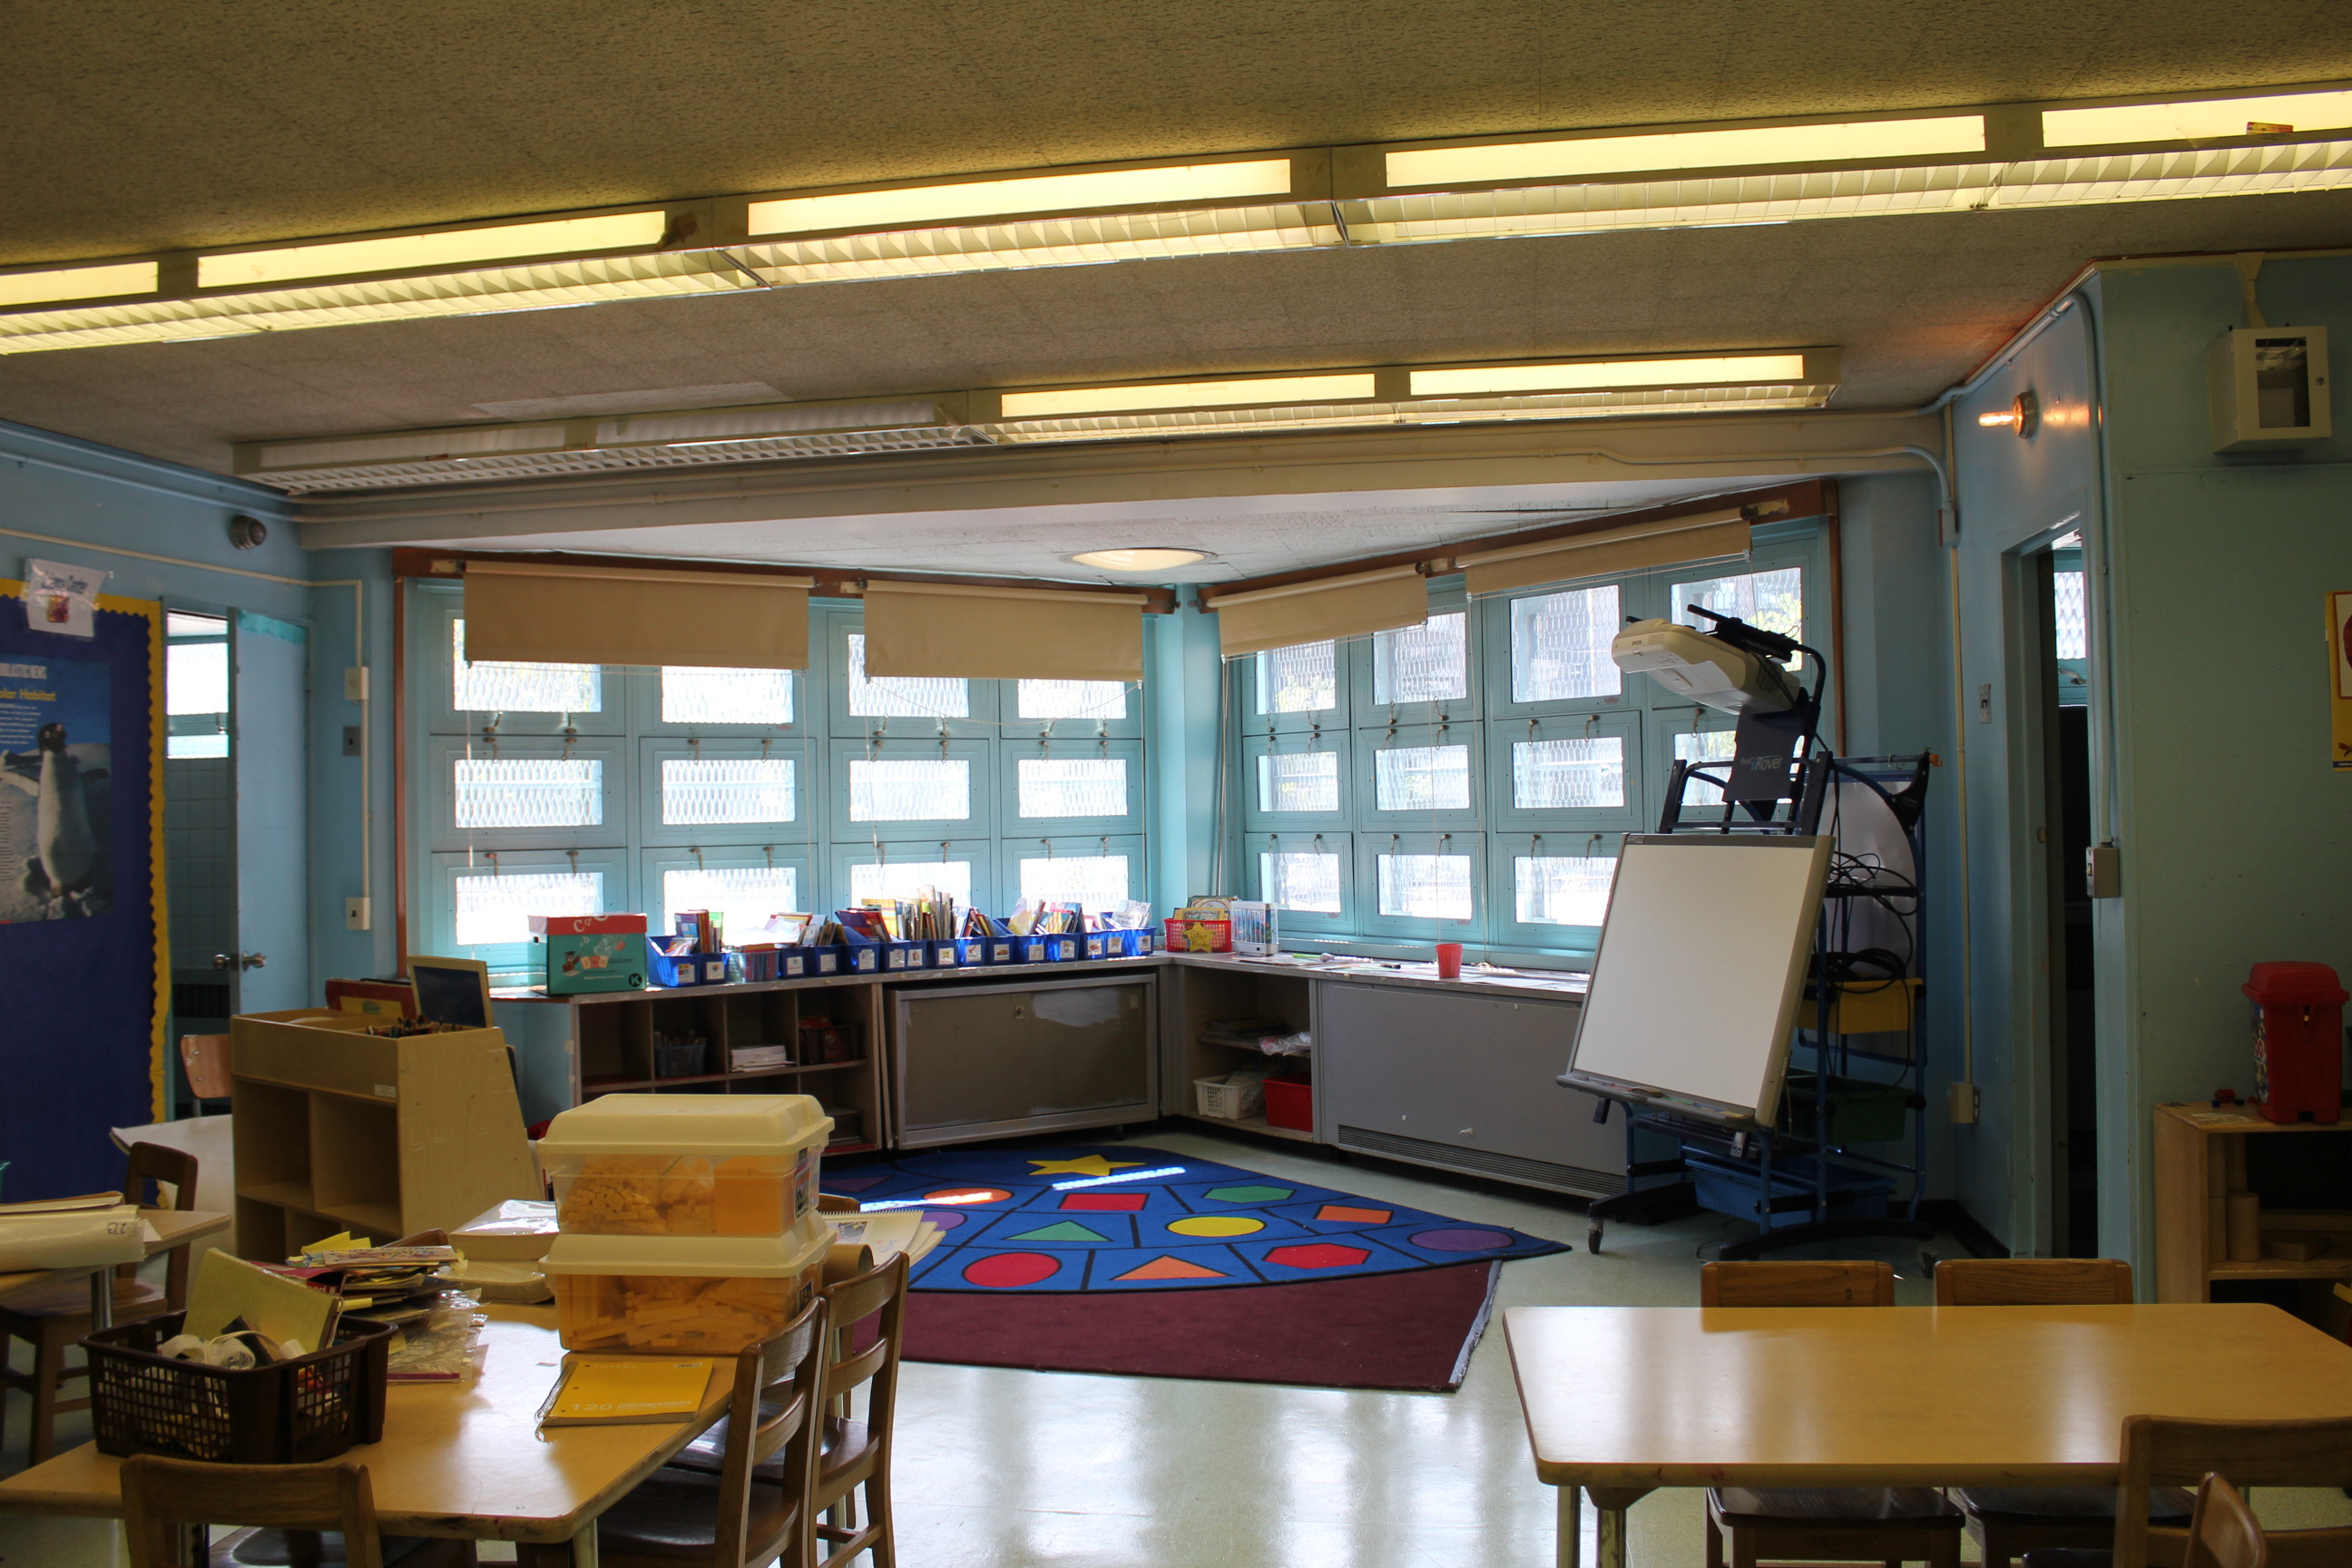 PS 185 Early Childhood Magnet School for Discovery and Design | Re-Designing Learning ...2592 x 1728